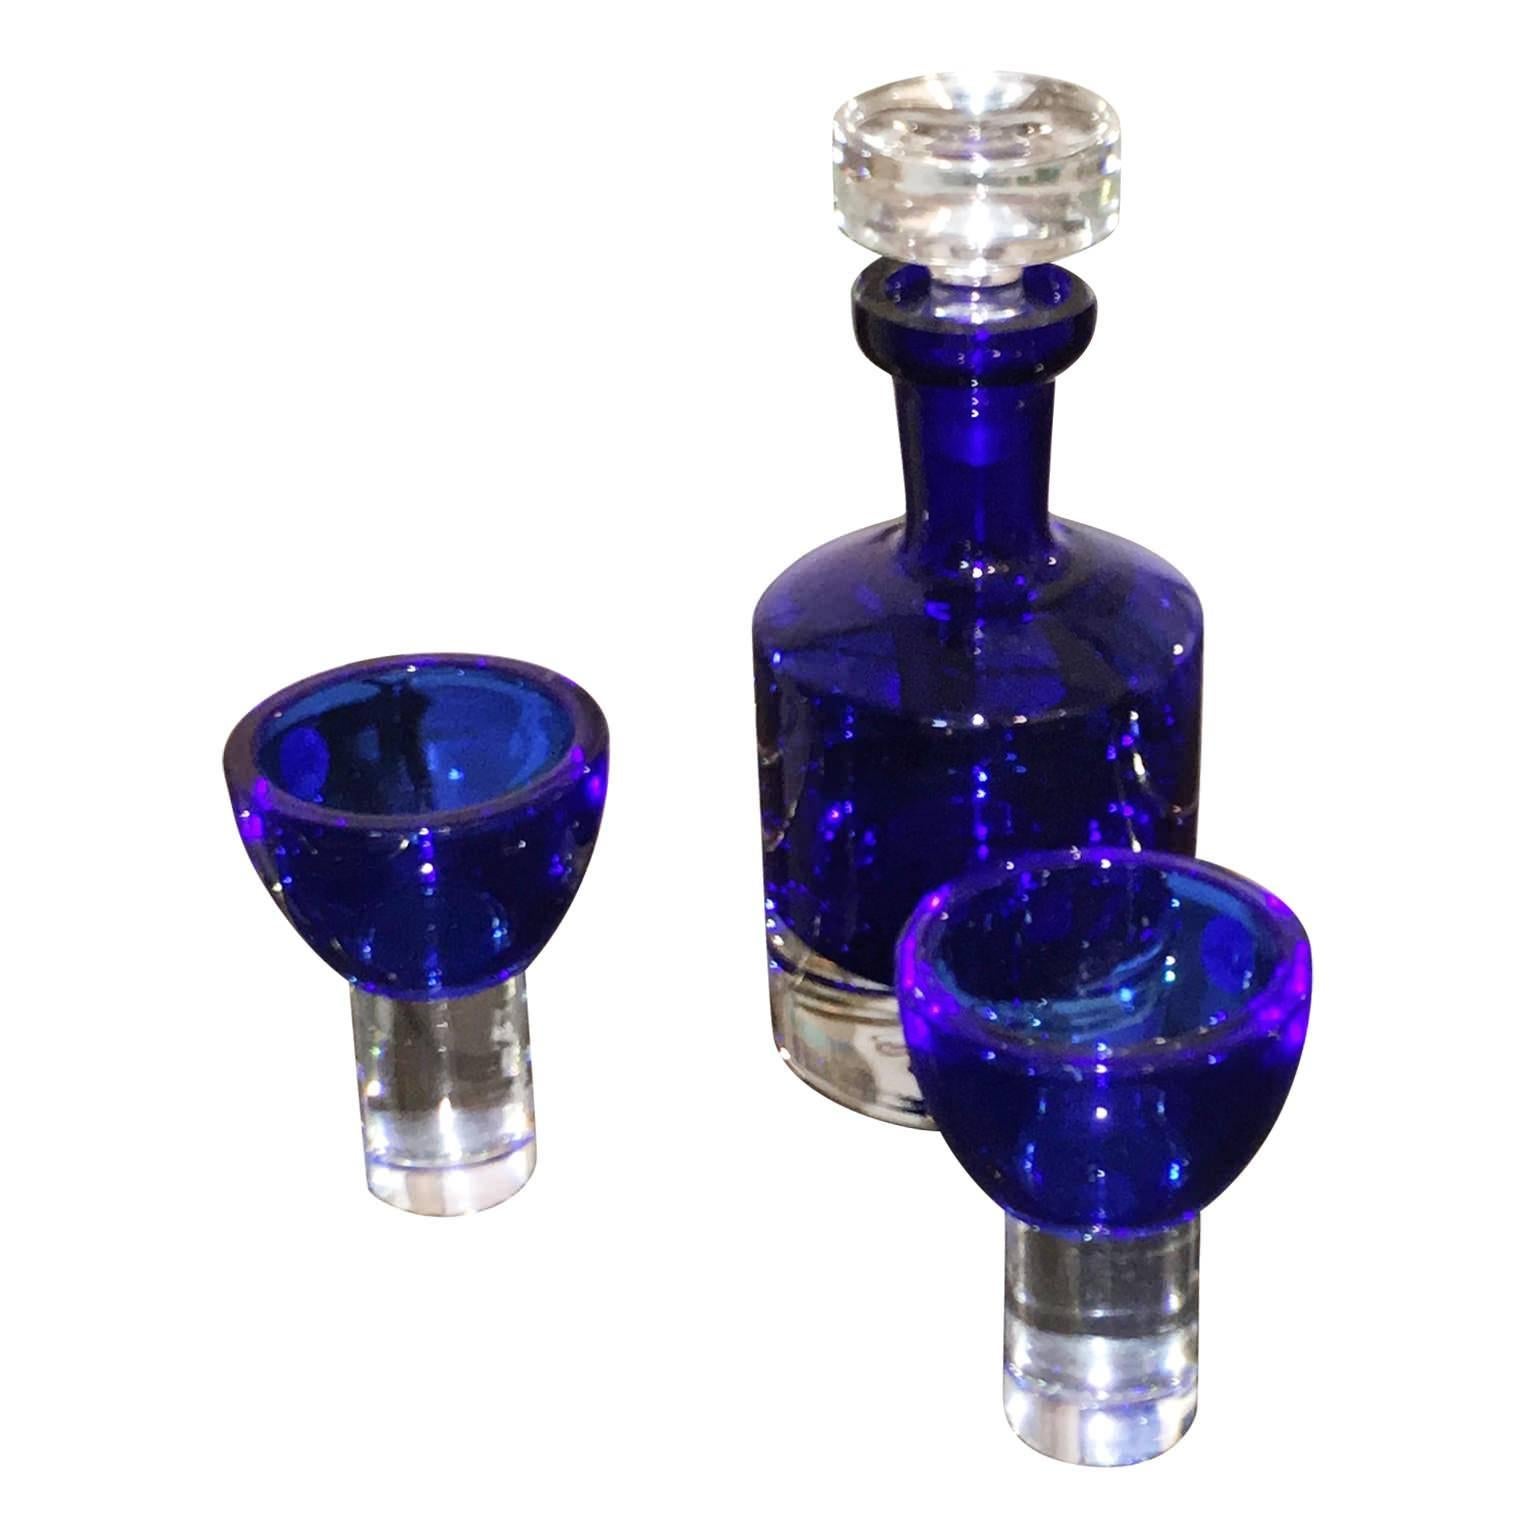  20th Century Blue Decator w/ 2 Crystal Glasses by Cristal d' Arques, France